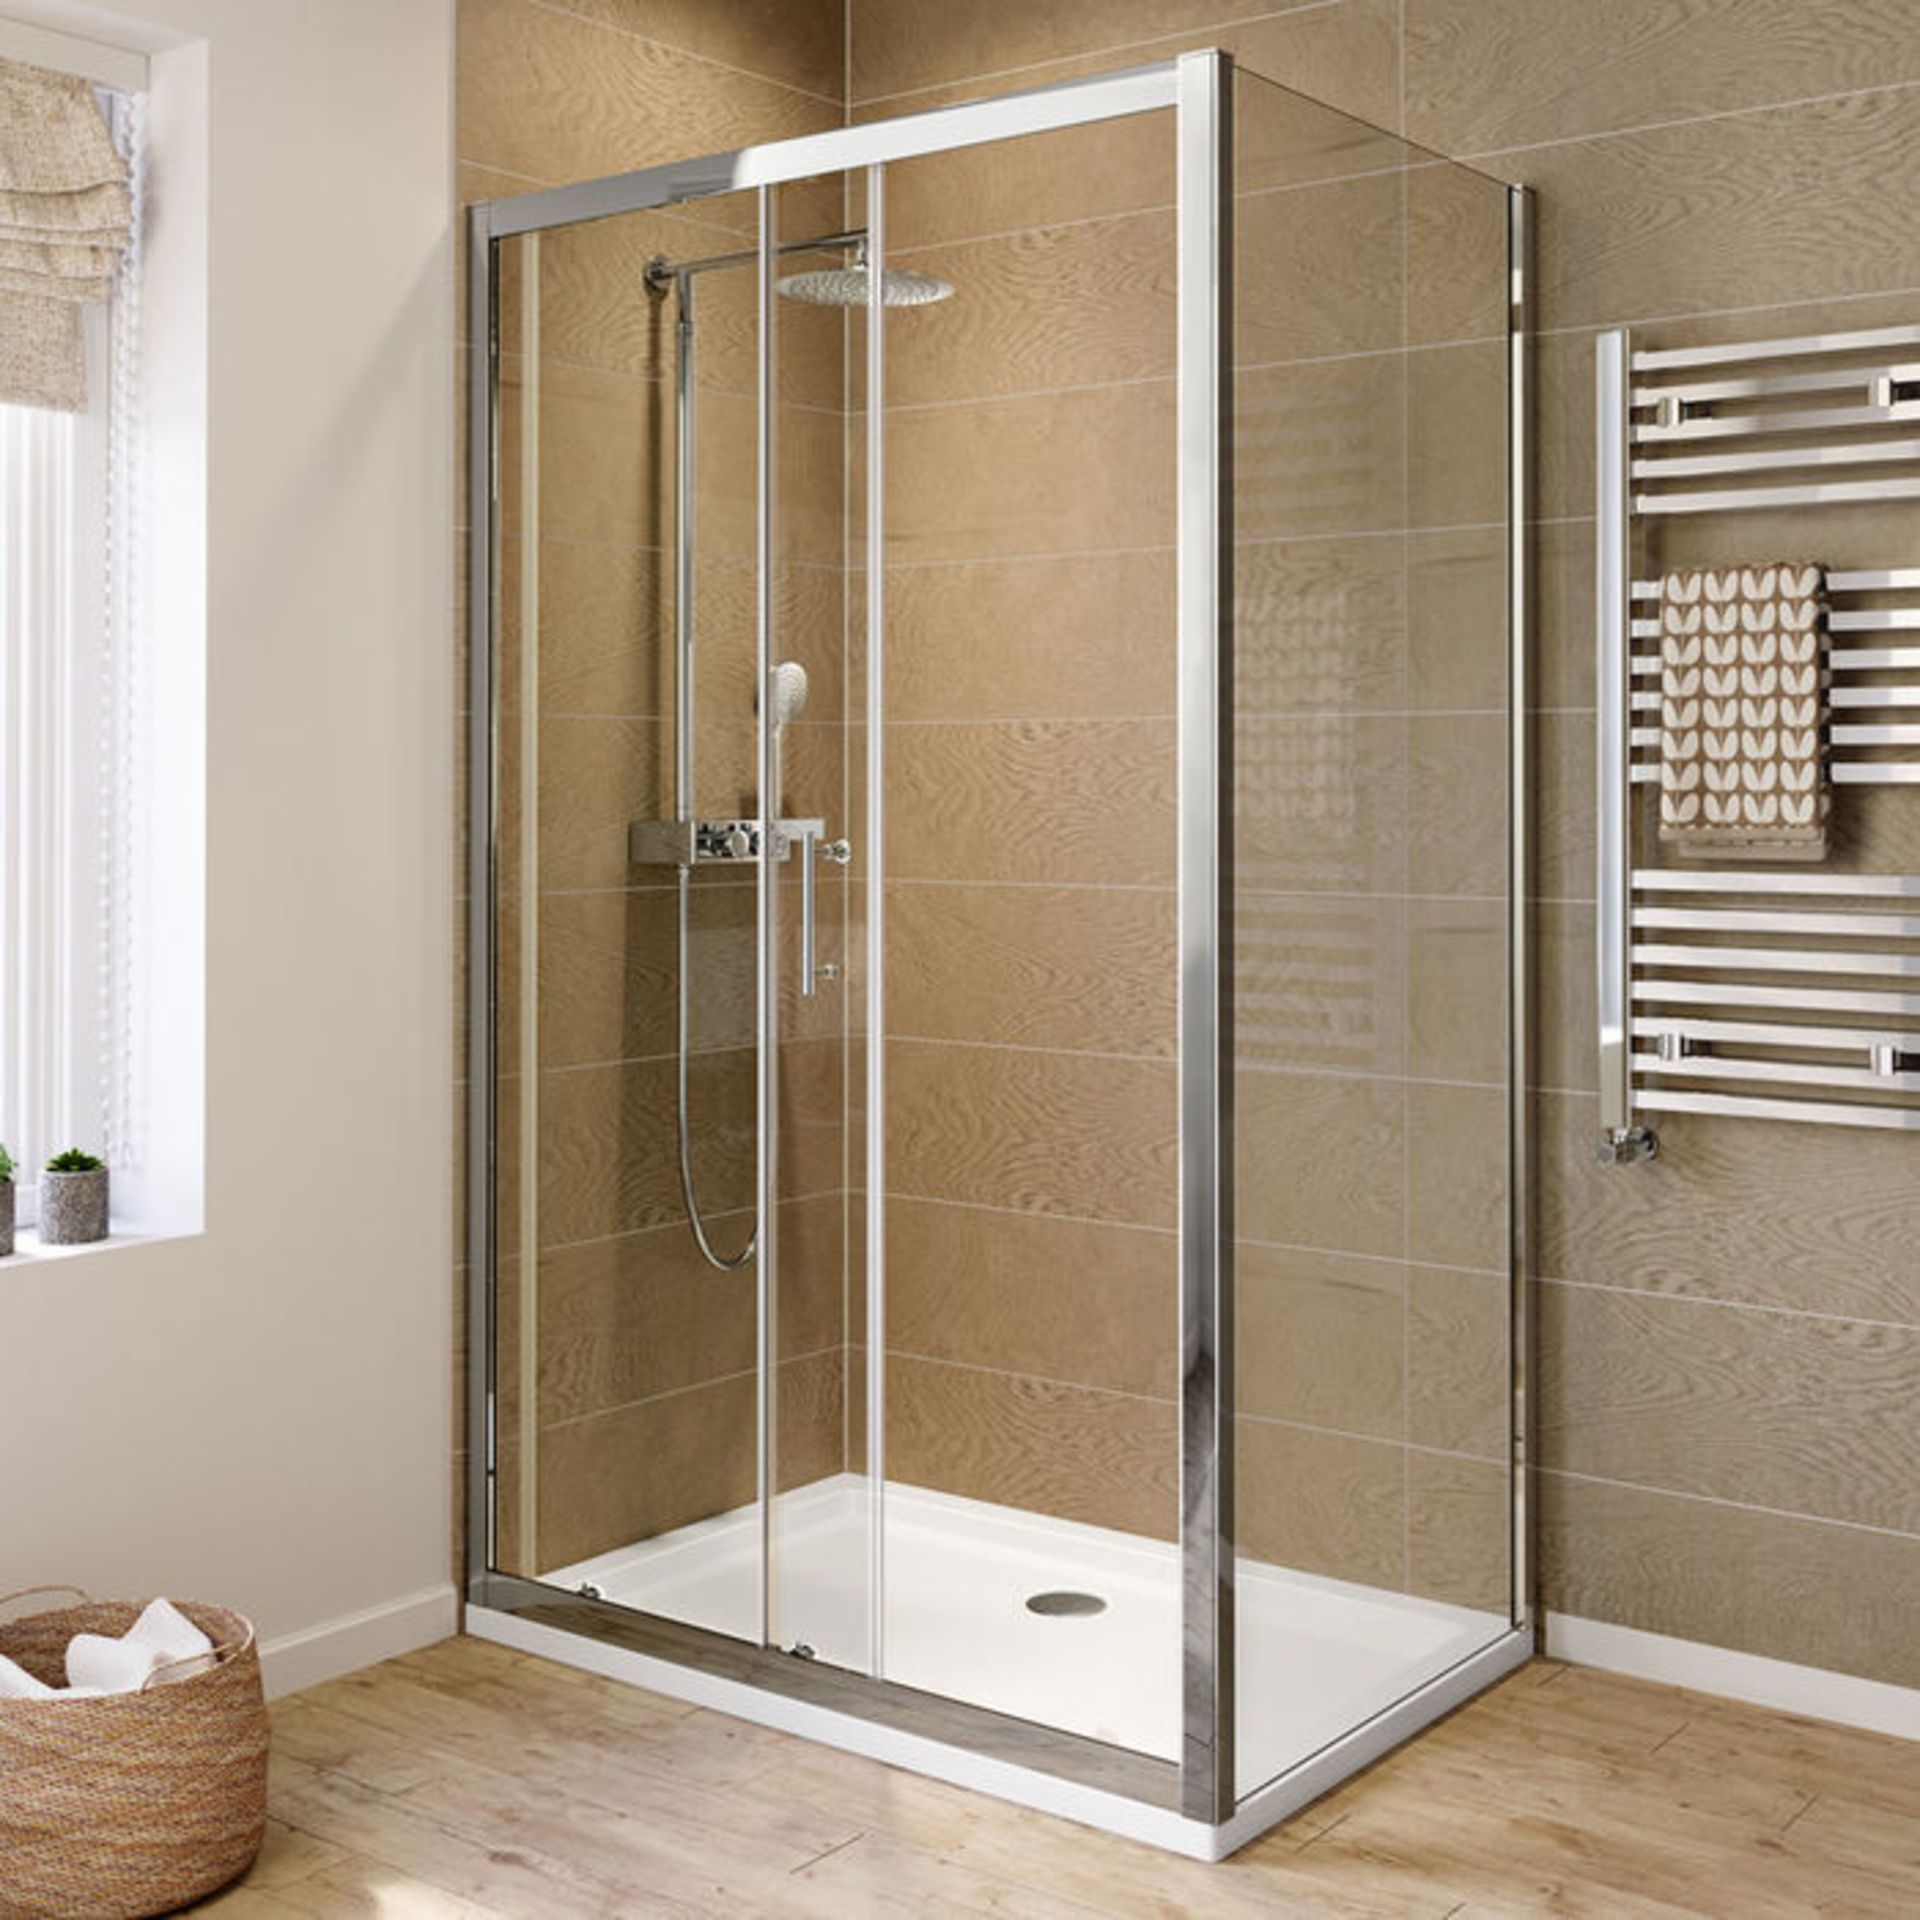 New (S18) 1500x900 mm - 6 mm - Elements Sliding Door Shower Enclosure. RRP £363.99. 6 mm Safety G... - Image 2 of 3